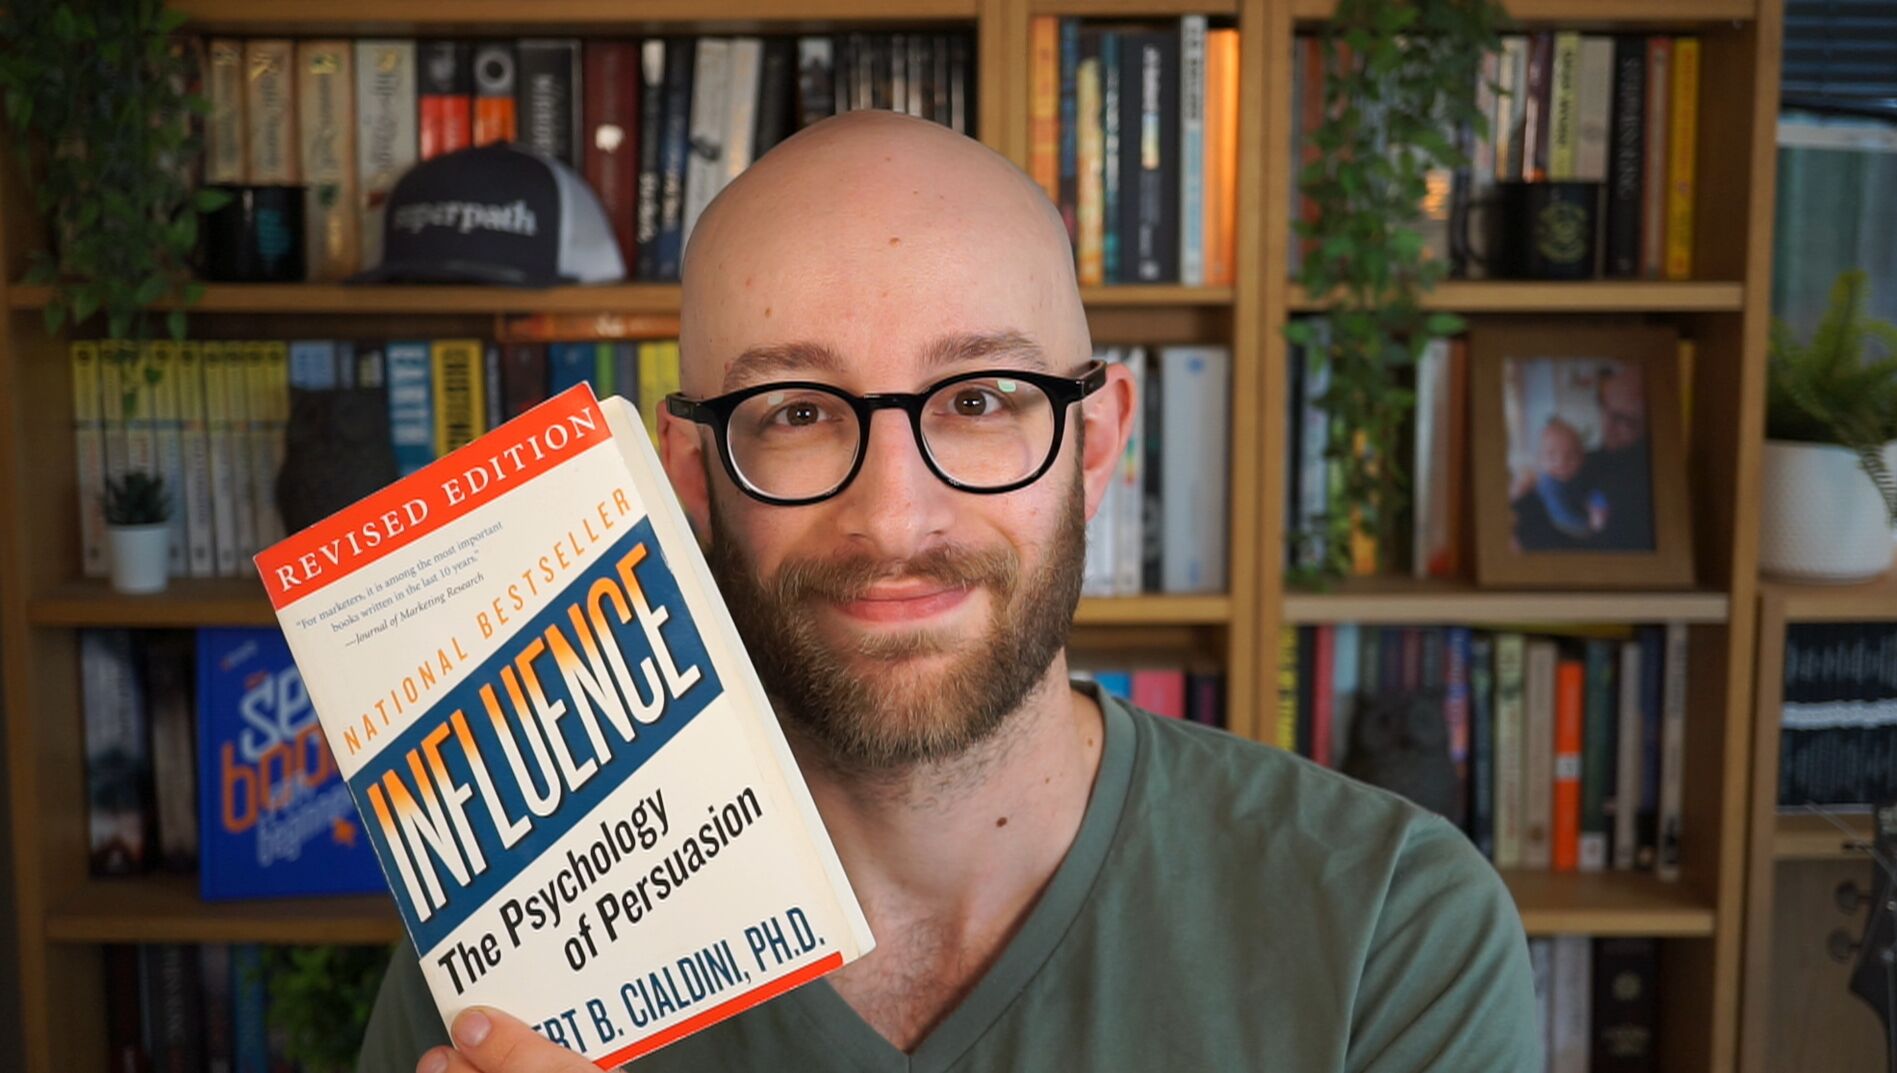 Ryan Law holding the book Influence